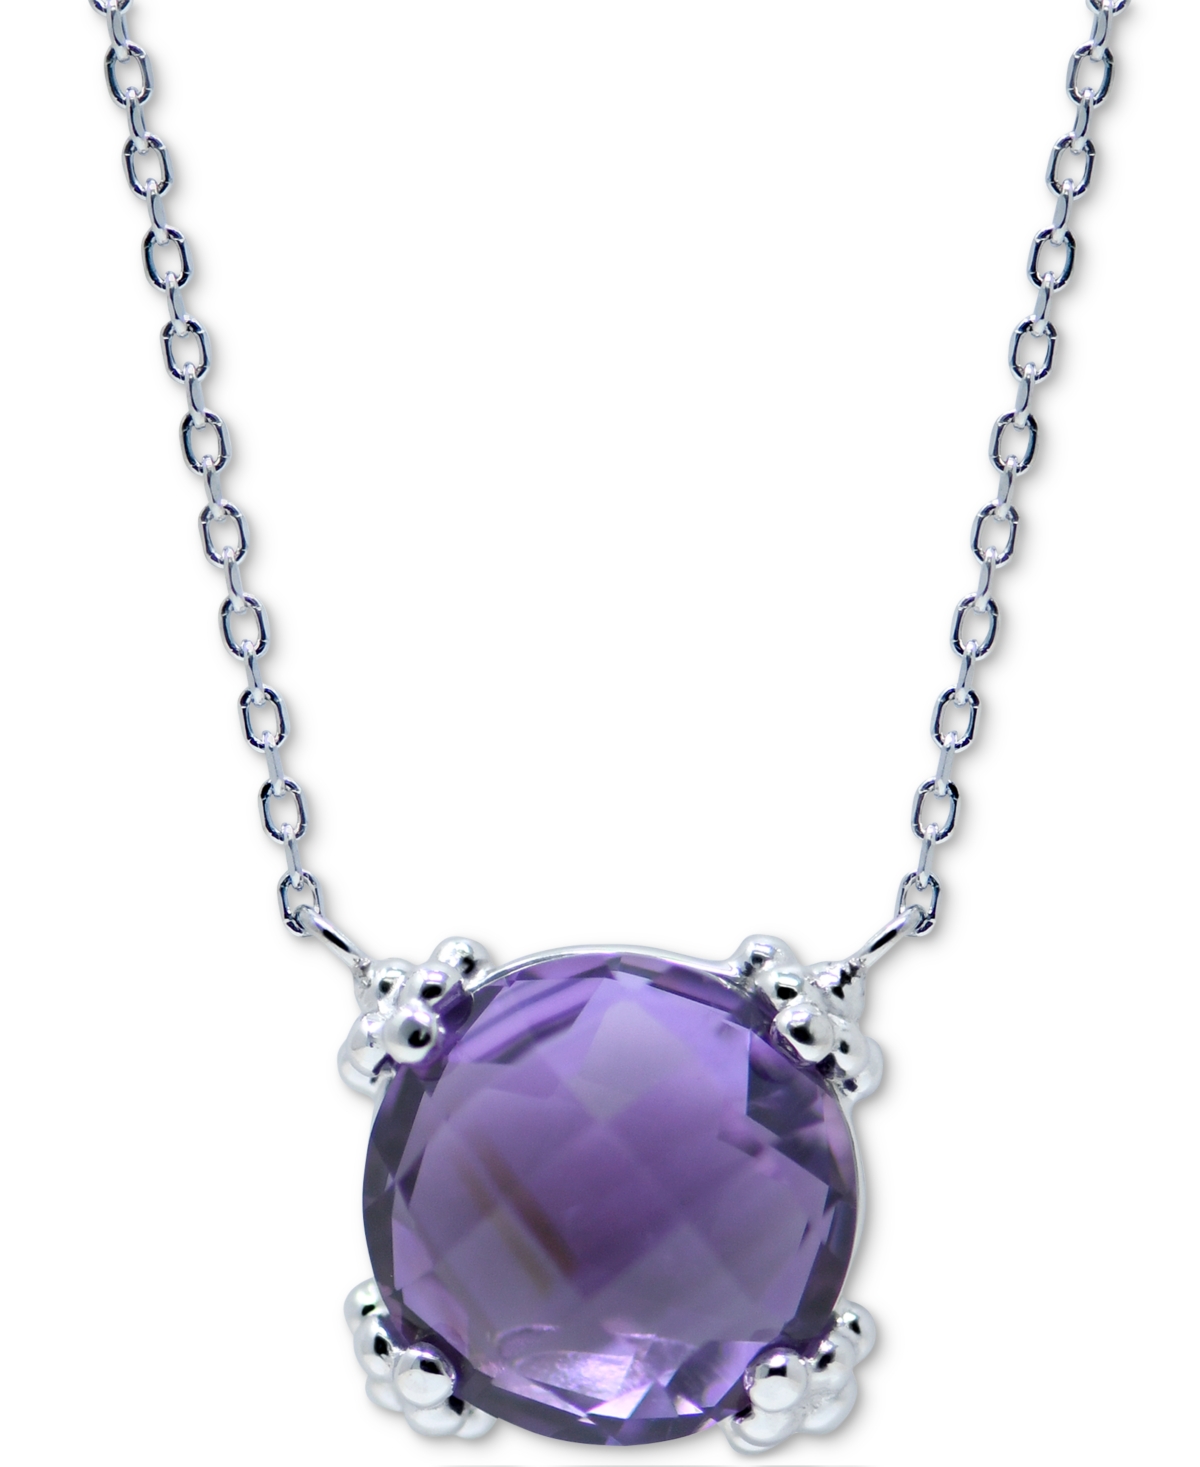 Amethyst Solitaire Pendant Necklace (2-7/8 ct. t.w.) in Sterling Silver, 16" + 1" extender - Purple